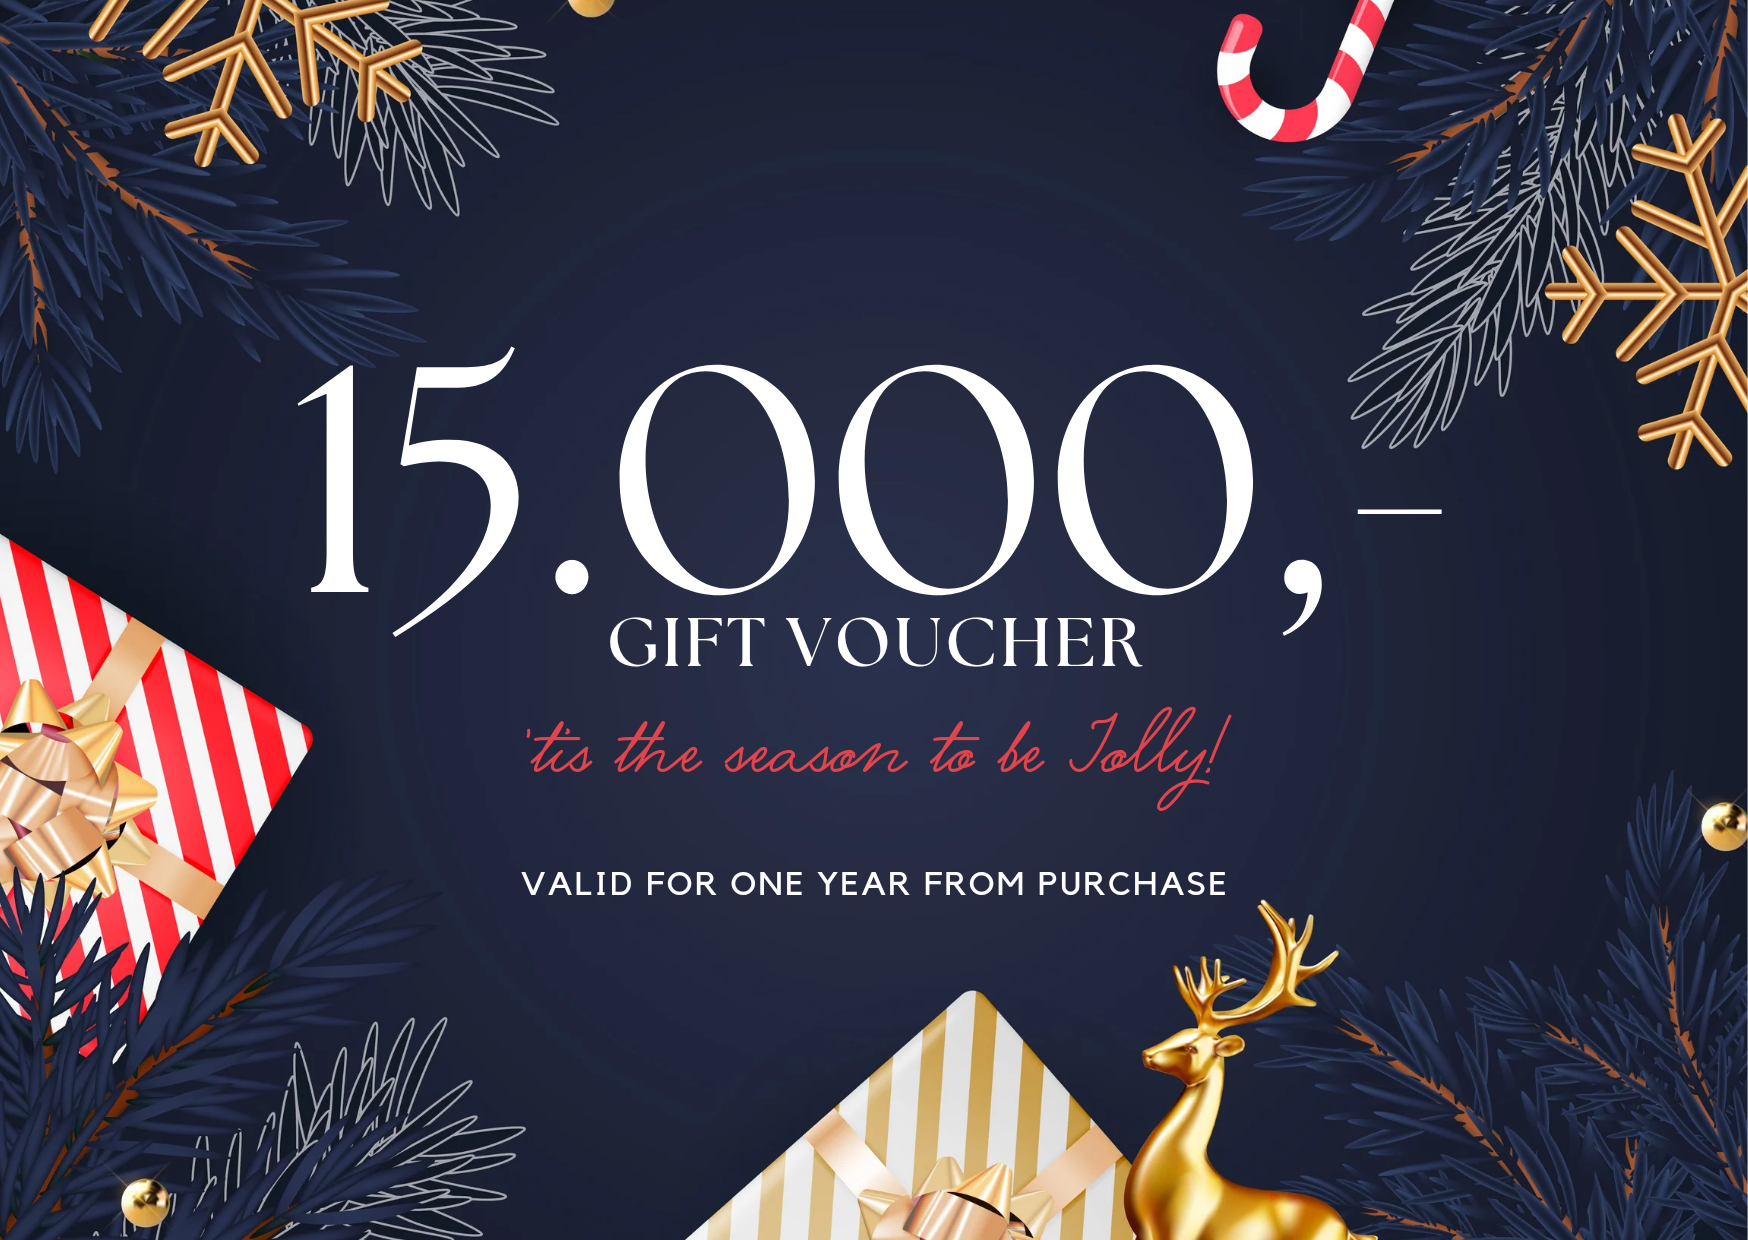 Gift vouchers from 5.000 HUF to 20.000 HUF